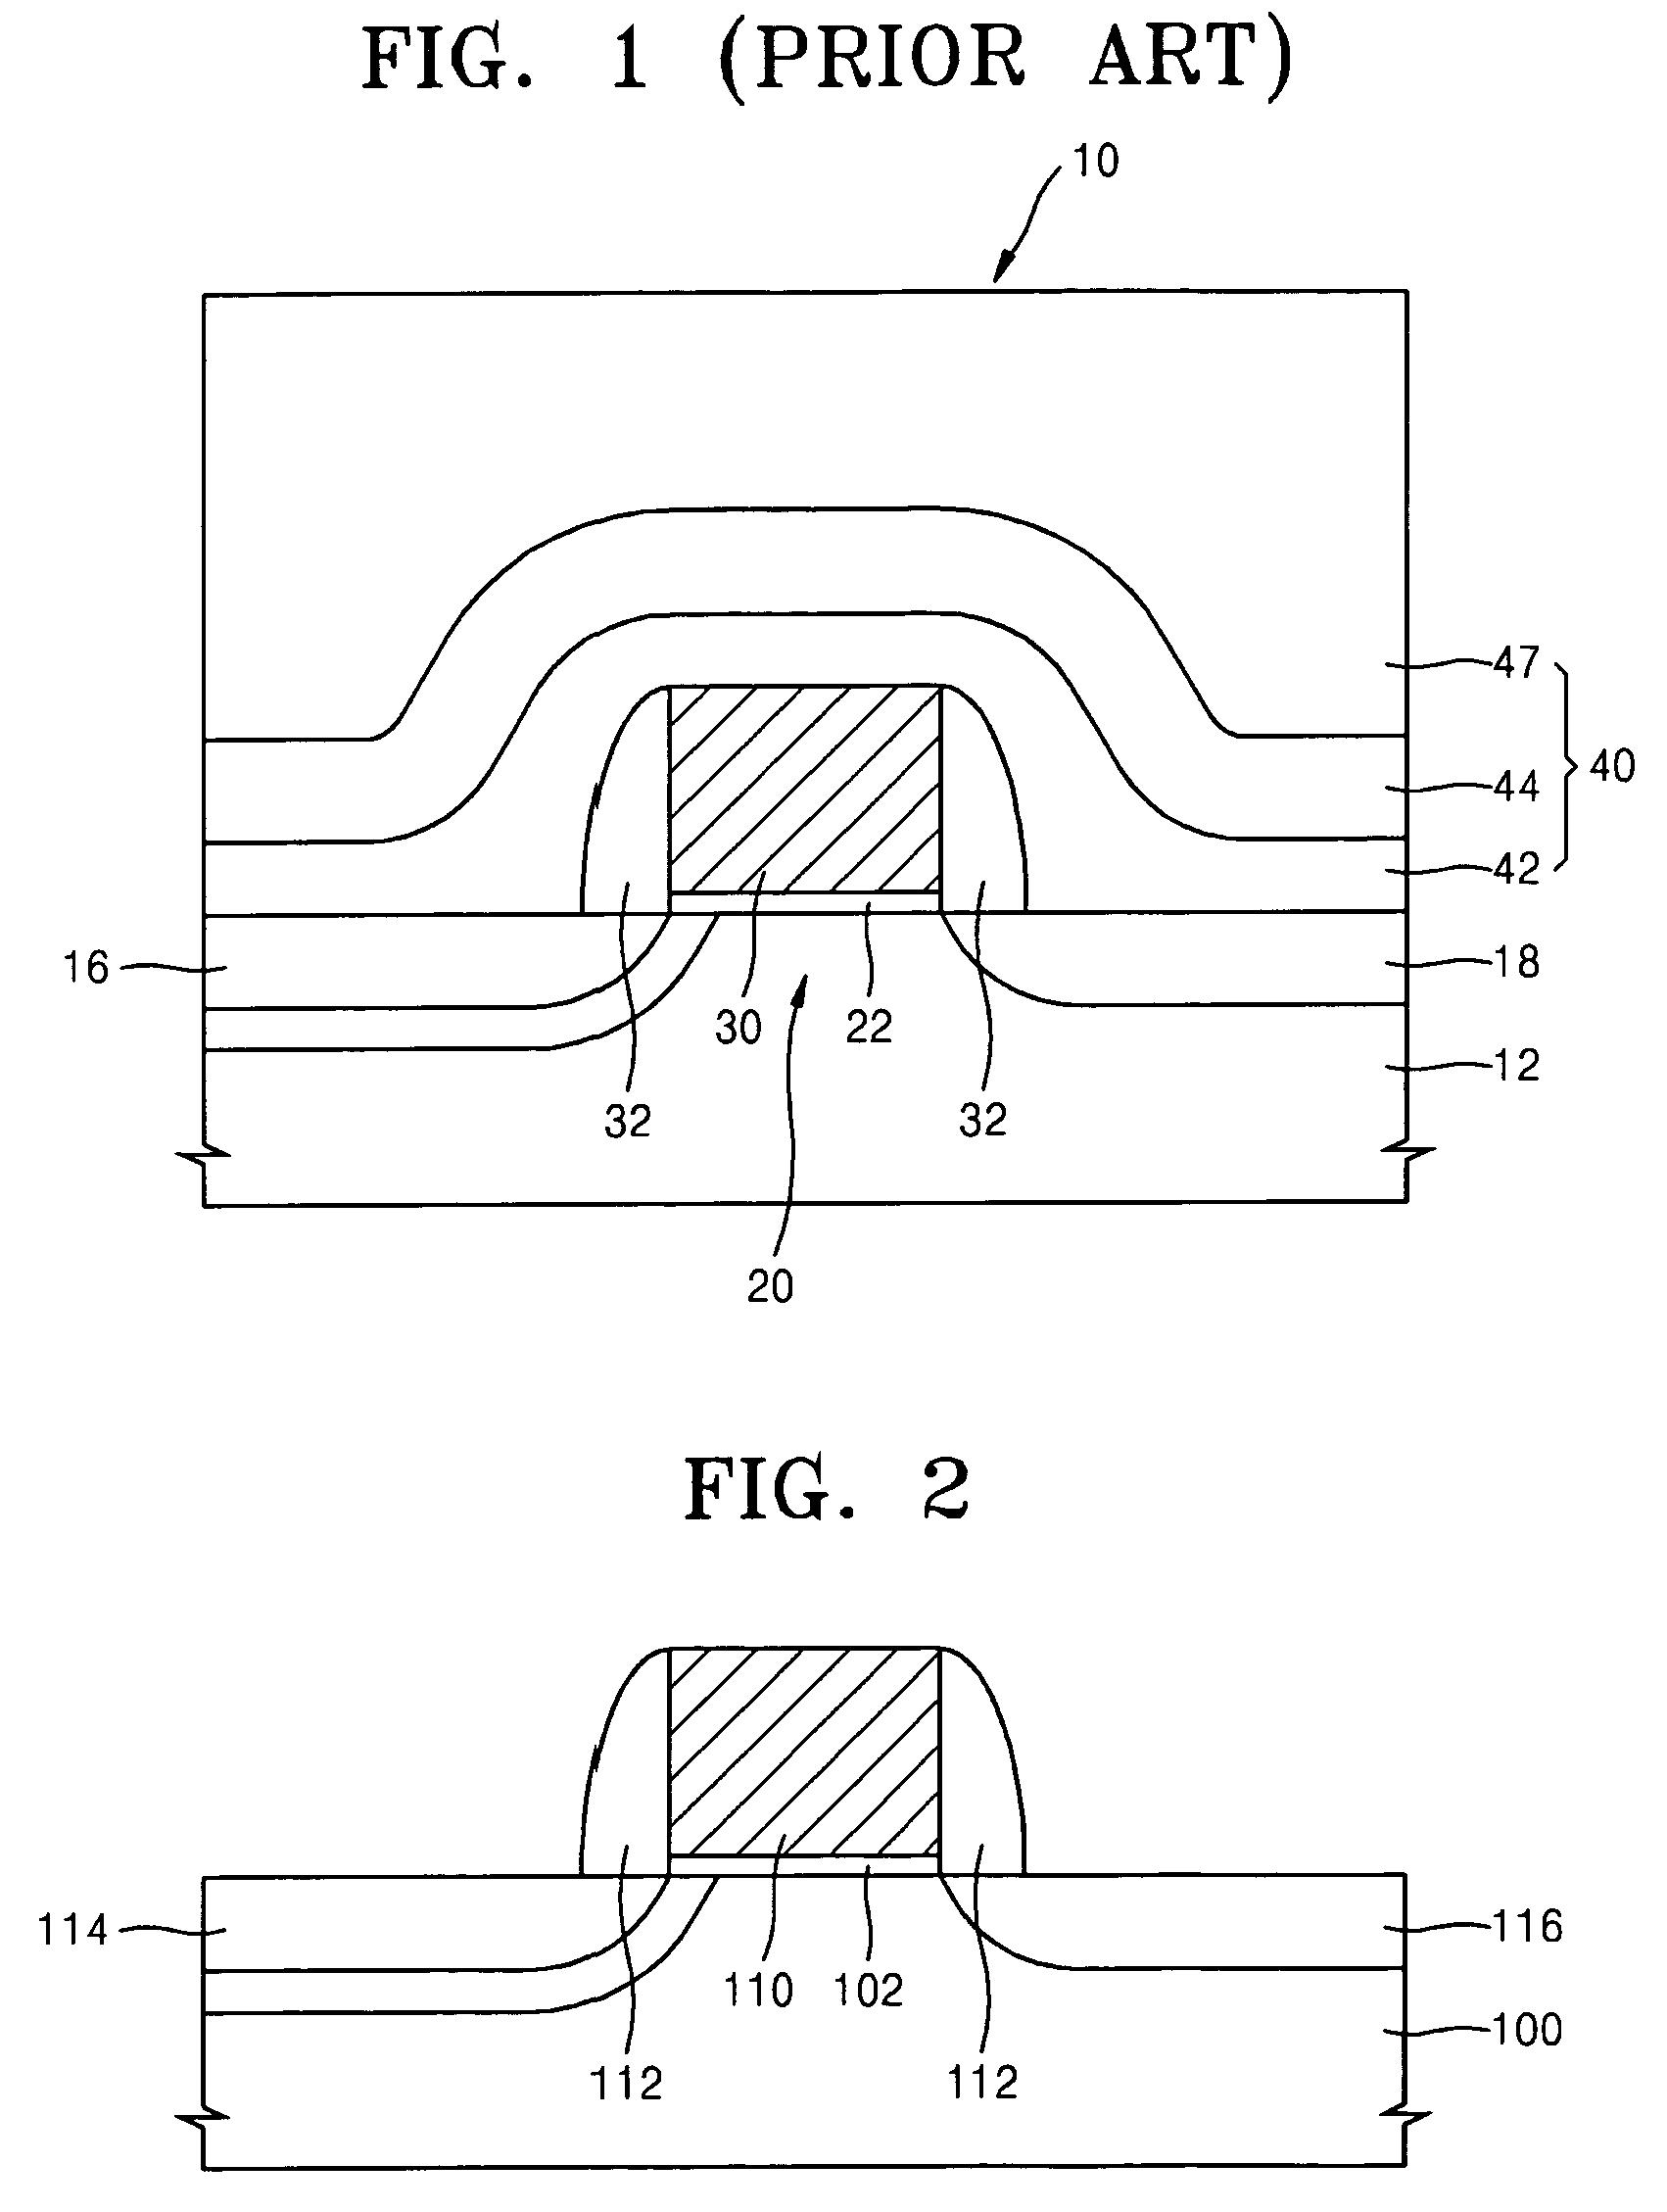 Erasable and programmable read only memory (EPROM) cell of an EPROM device and method of manufacturing a semiconductor device having the EPROM cell